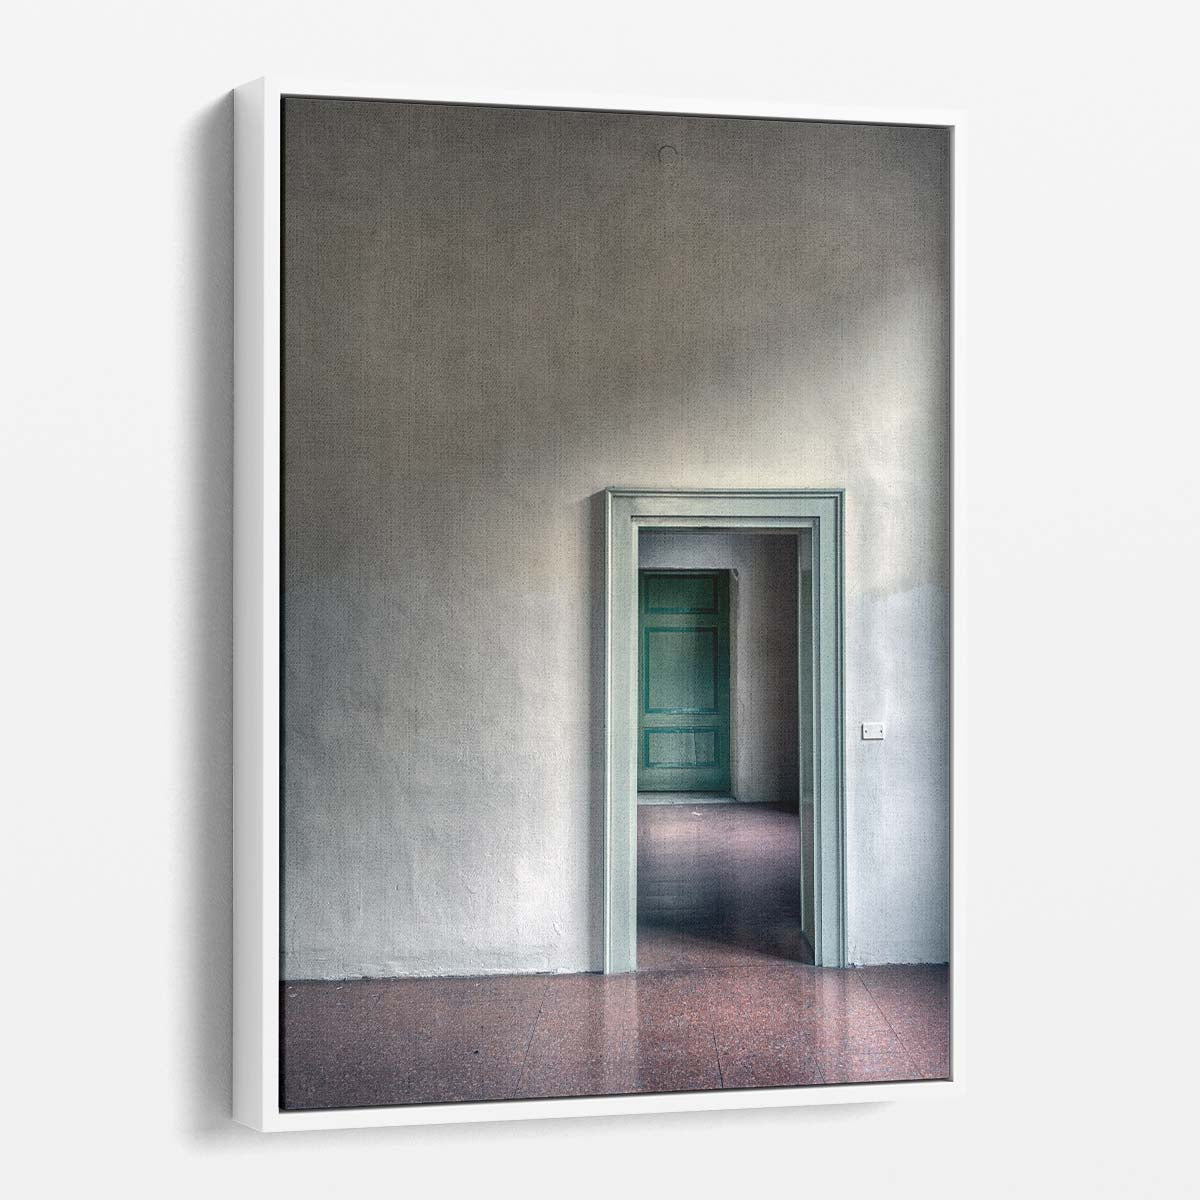 Architectural Photography Wall Art of Empty Room with Doorway Entrance by Luxuriance Designs, made in USA